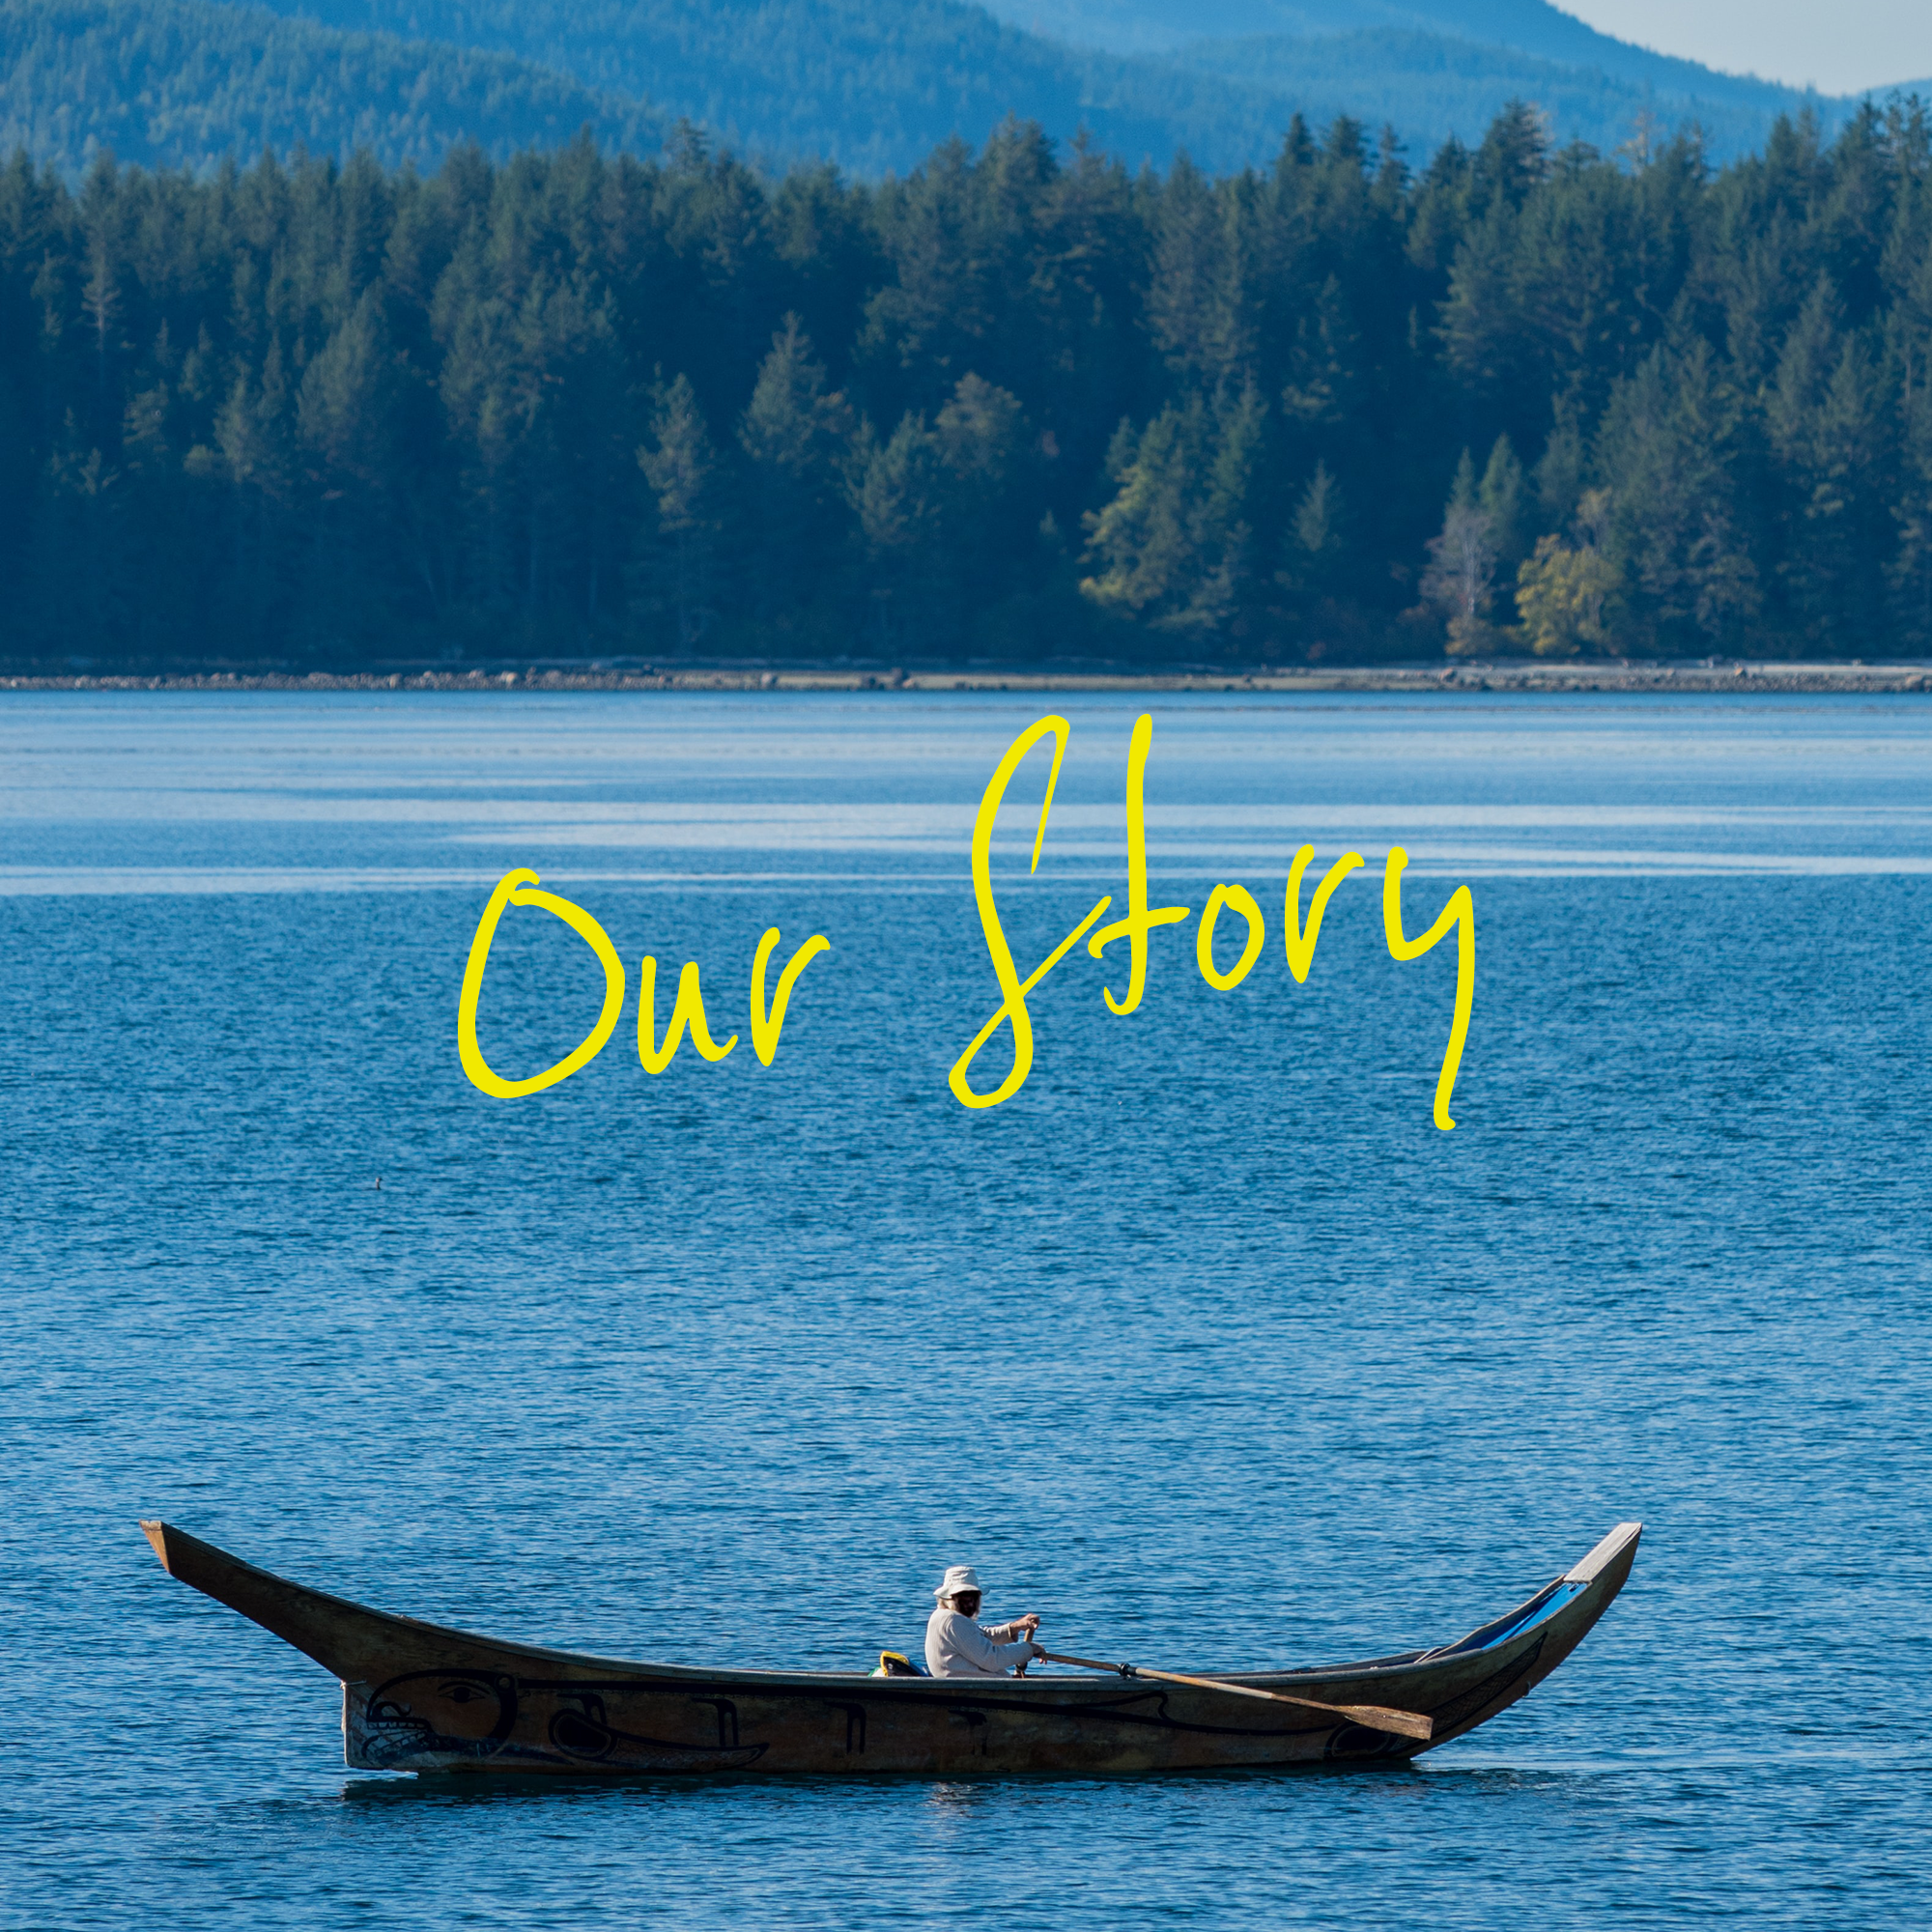 A person in a canoe rowing in a lake with trees in the distance and the words 'Our Story' in yellow handwriting